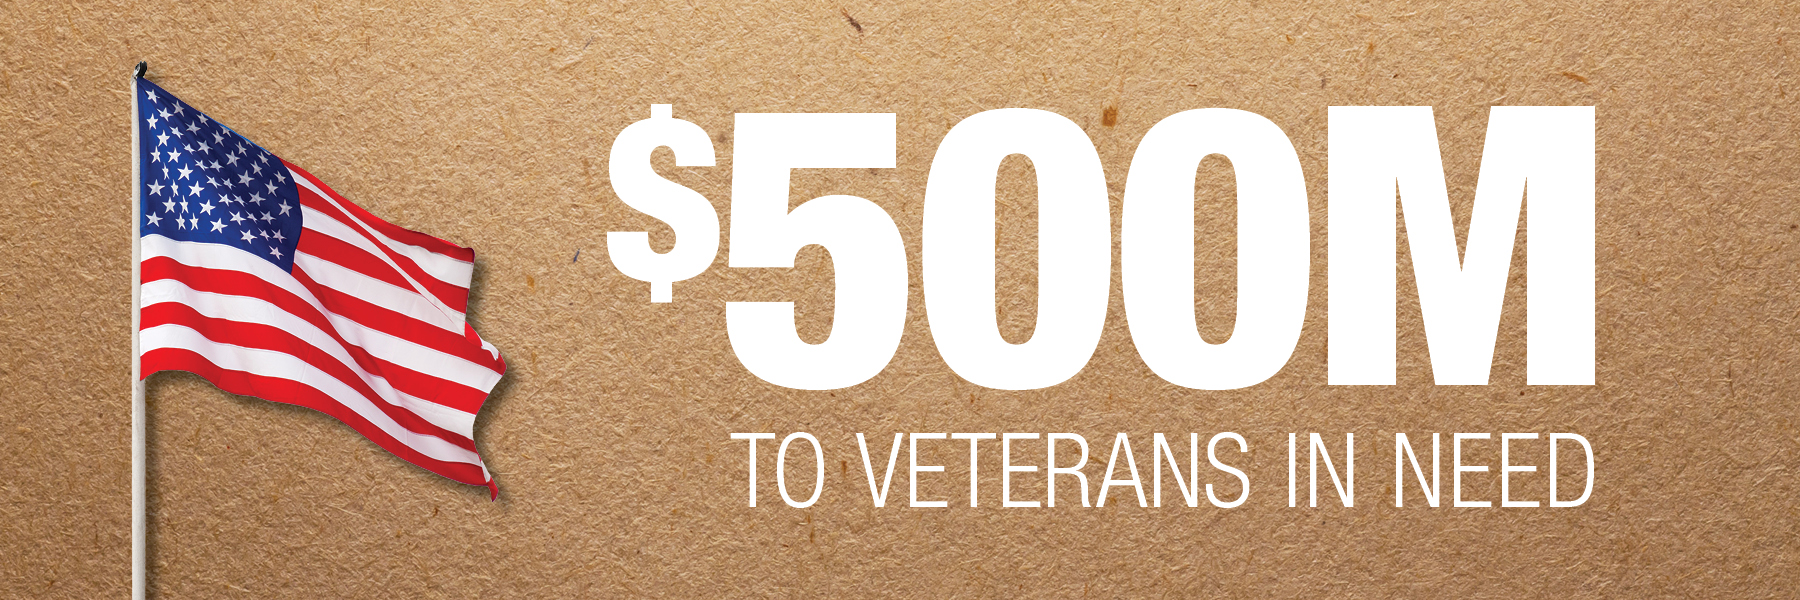 The Home Depot - Half of a Billion to Veteran Causes by 2025